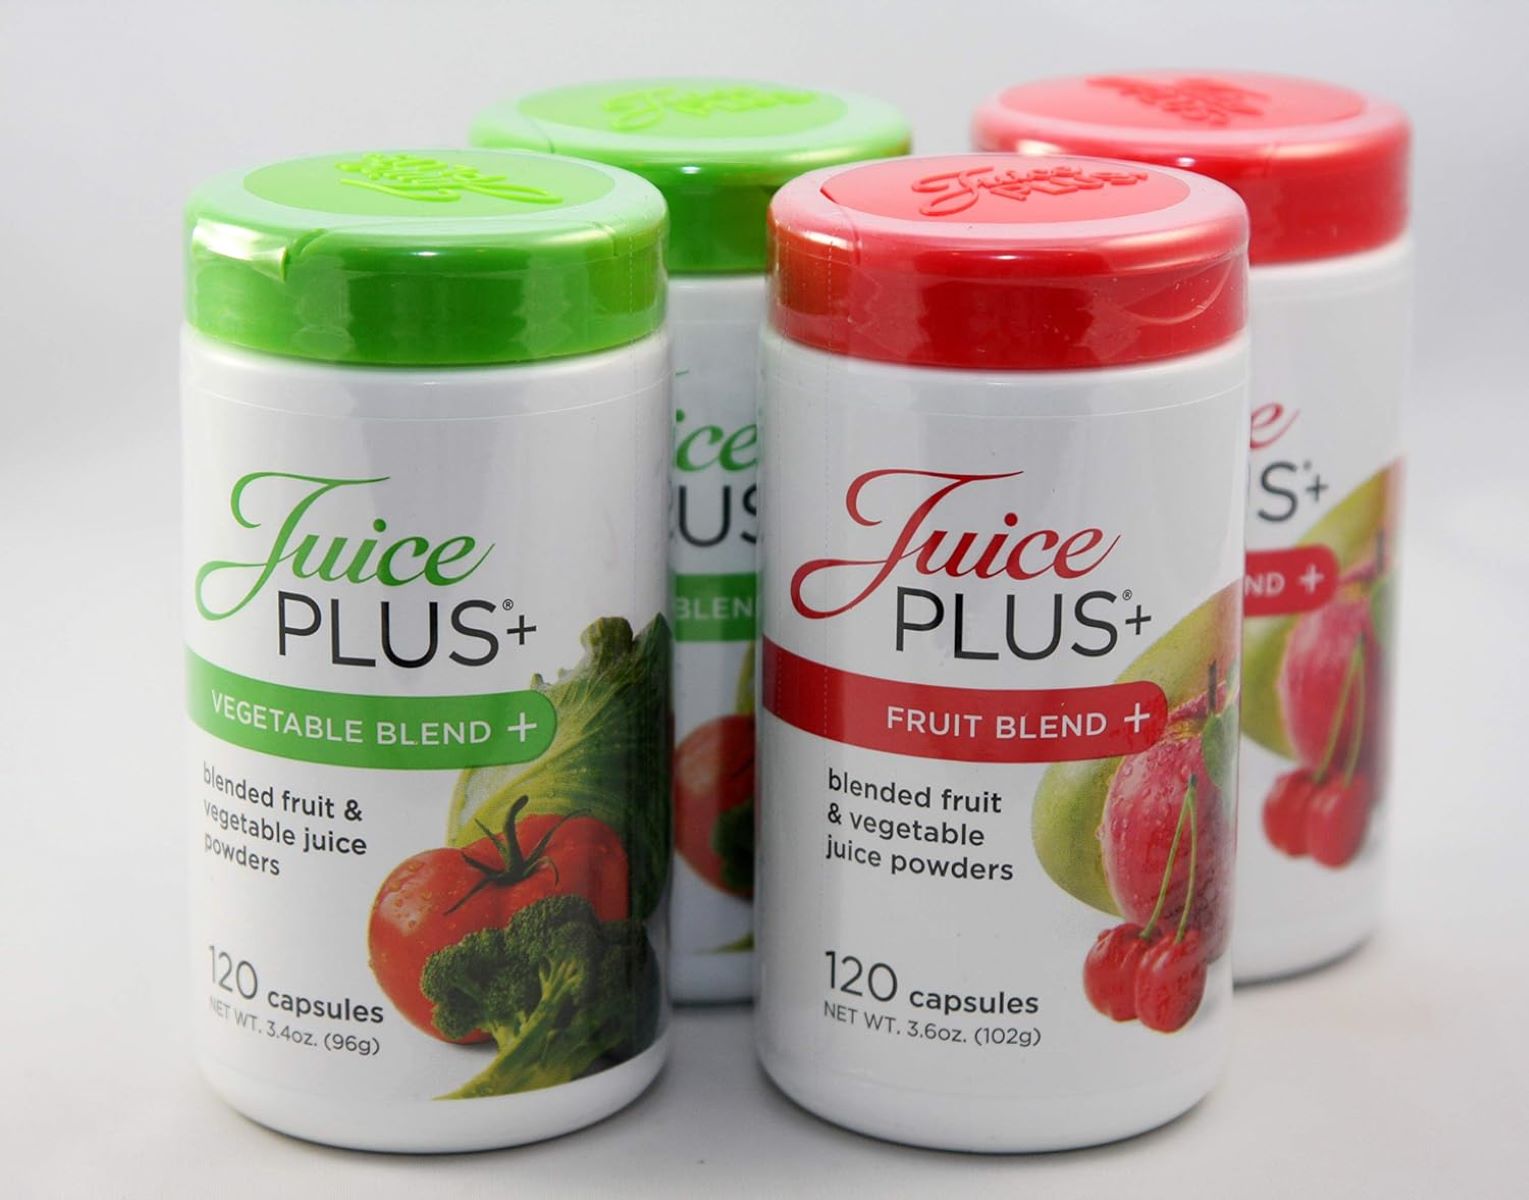 My Incredible Experience With Juice Plus!